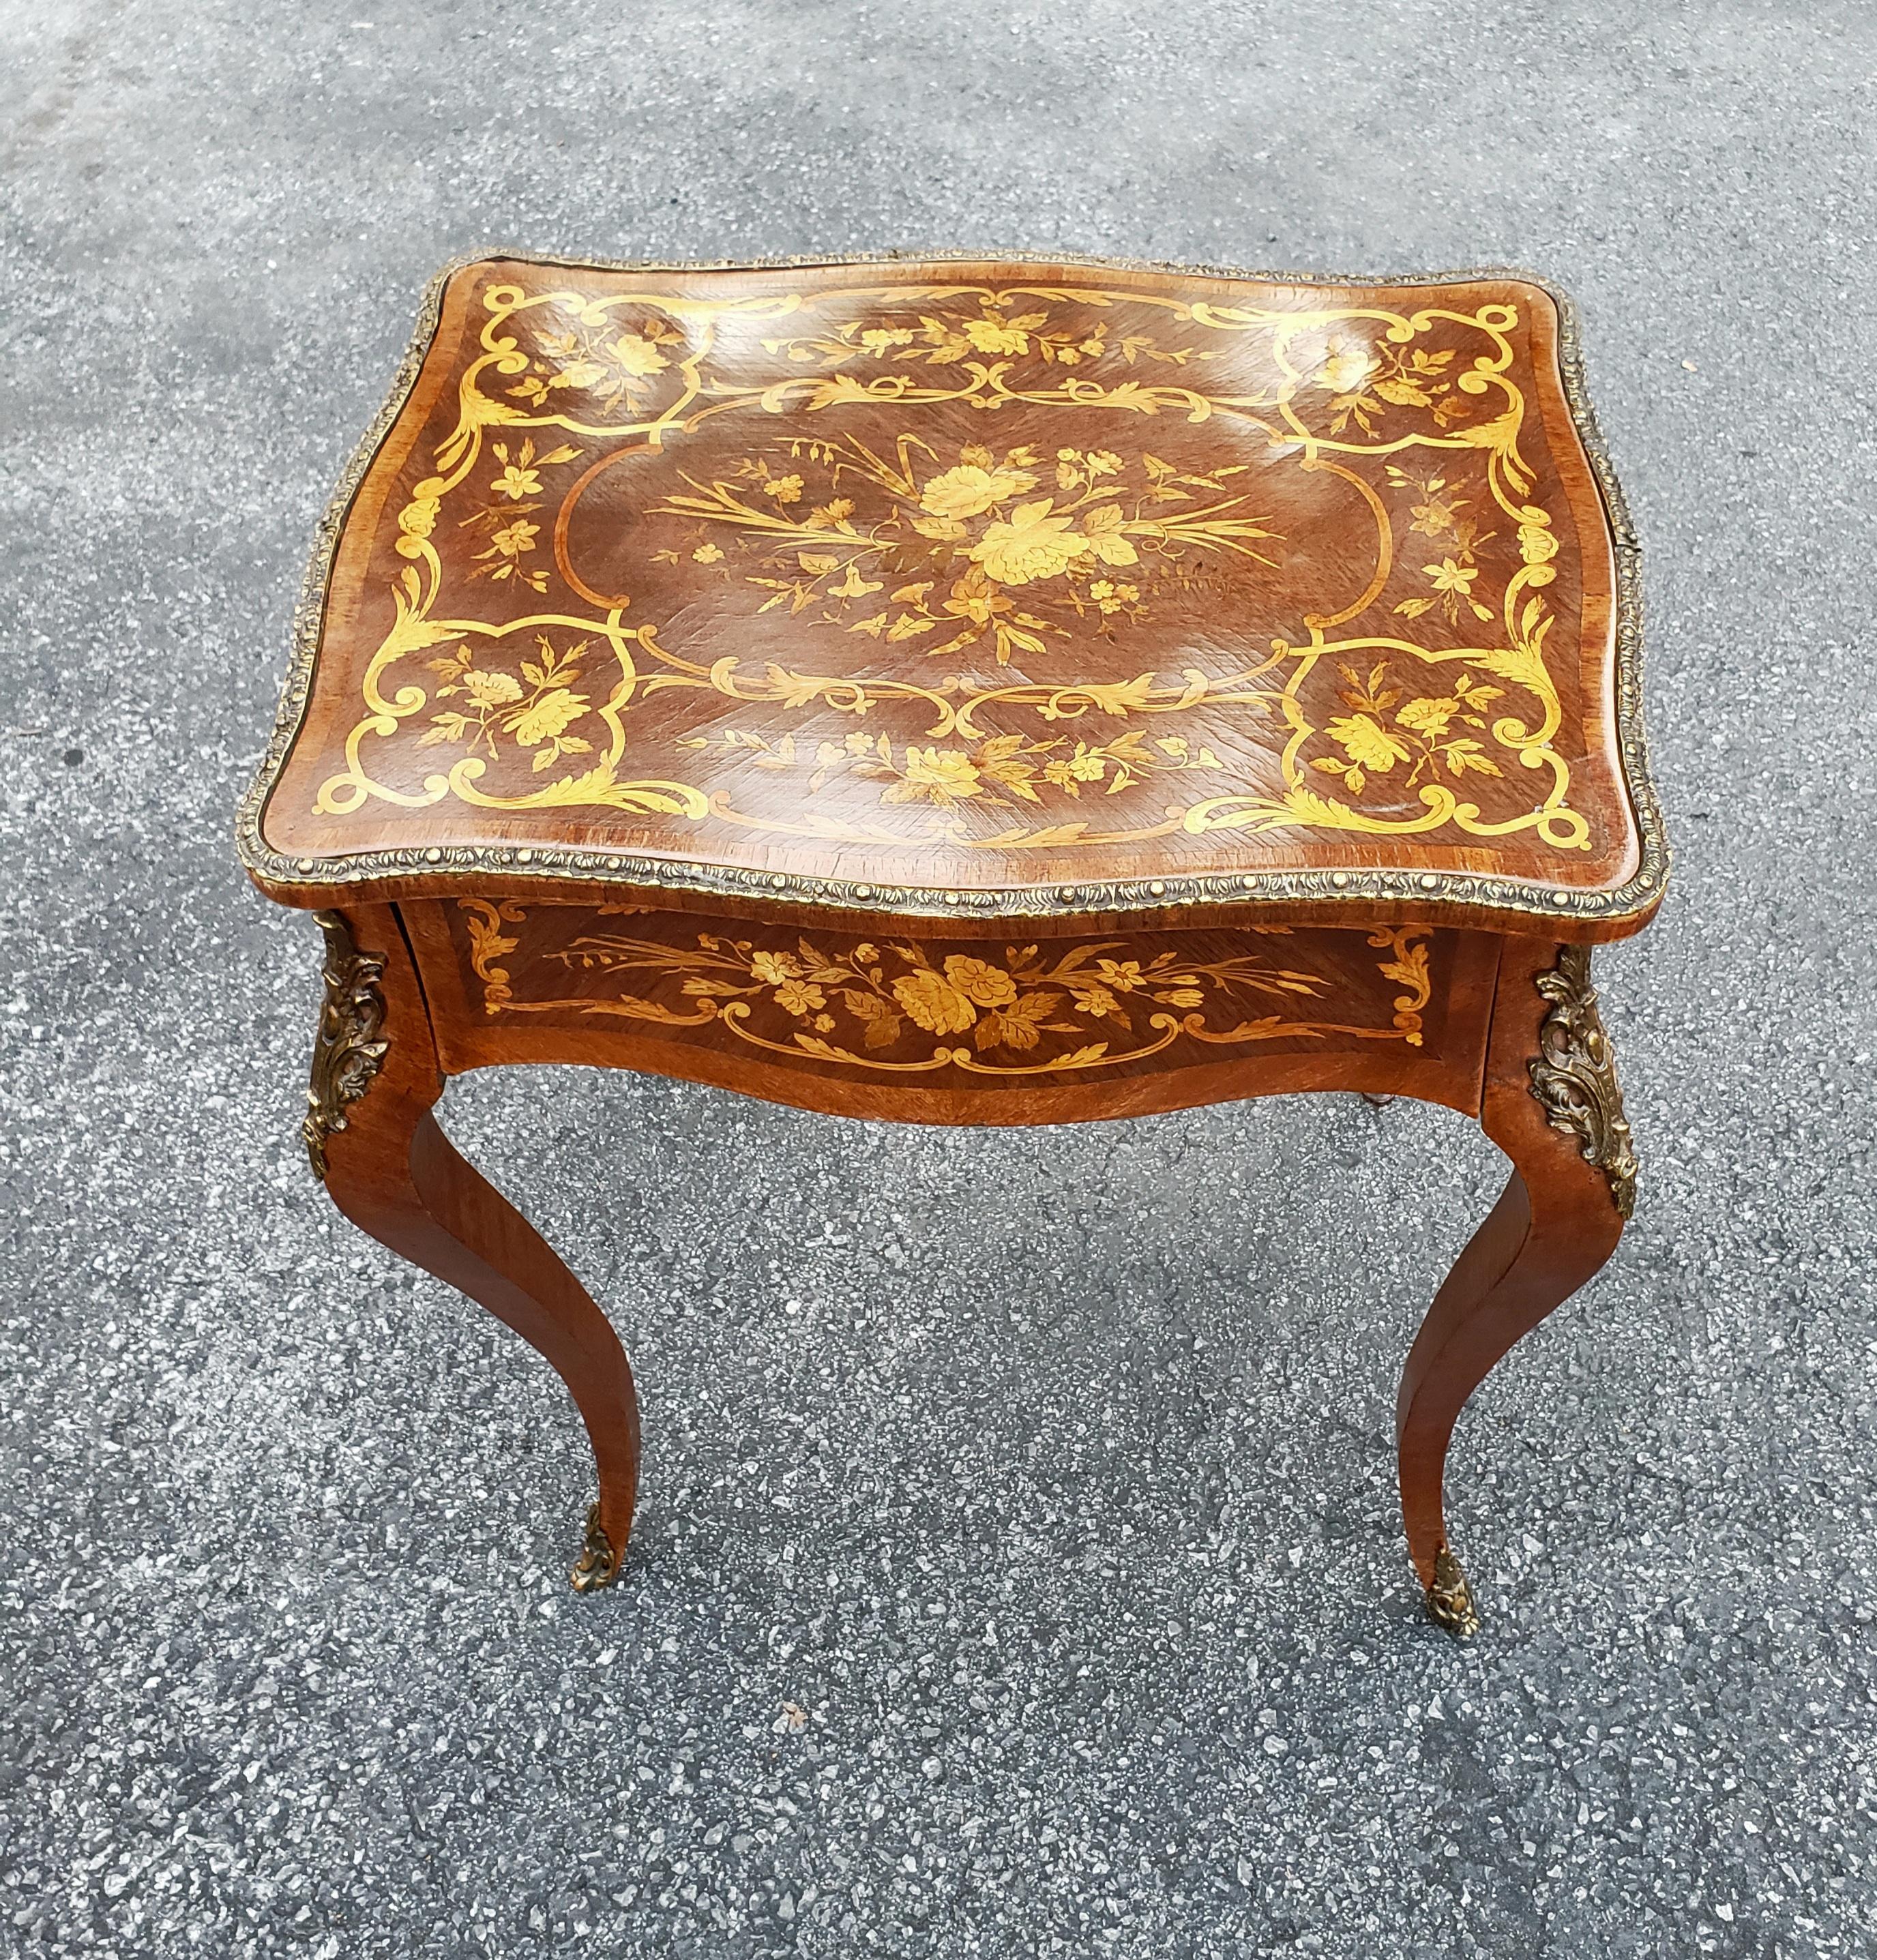 An exceptional Louis XV Style Dutch Marquetry Satinwood Inlaid and Mahogany Single-Drawer Side Table with ormalu mounted on cabriole legs. Measures 22.25